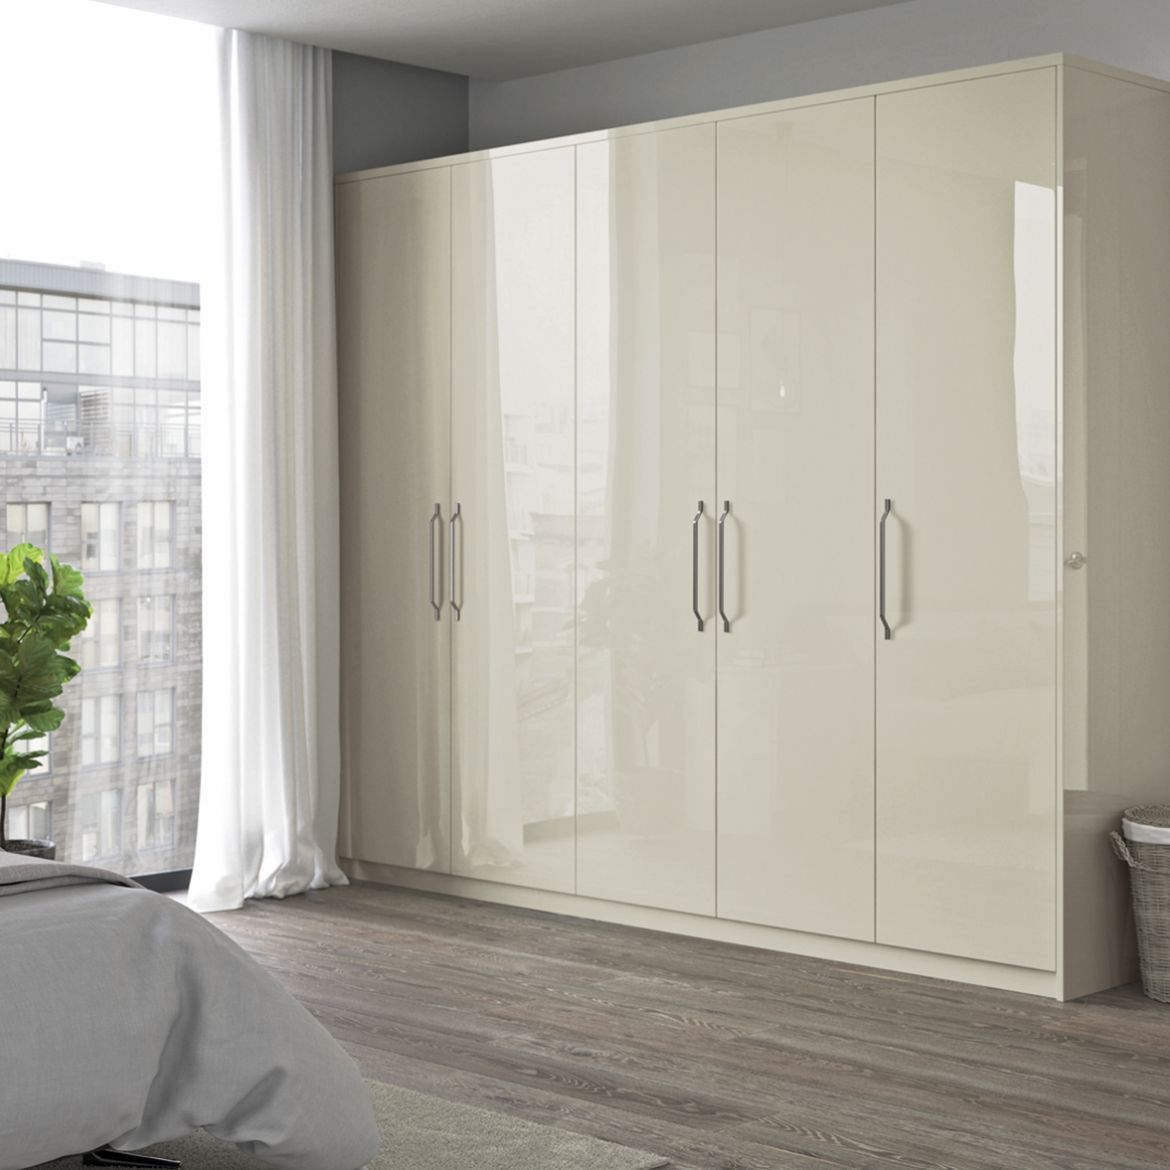 Reflections Wardrobe | Cash & Carry Kitchens Throughout White Gloss Wardrobes (Photo 13 of 15)